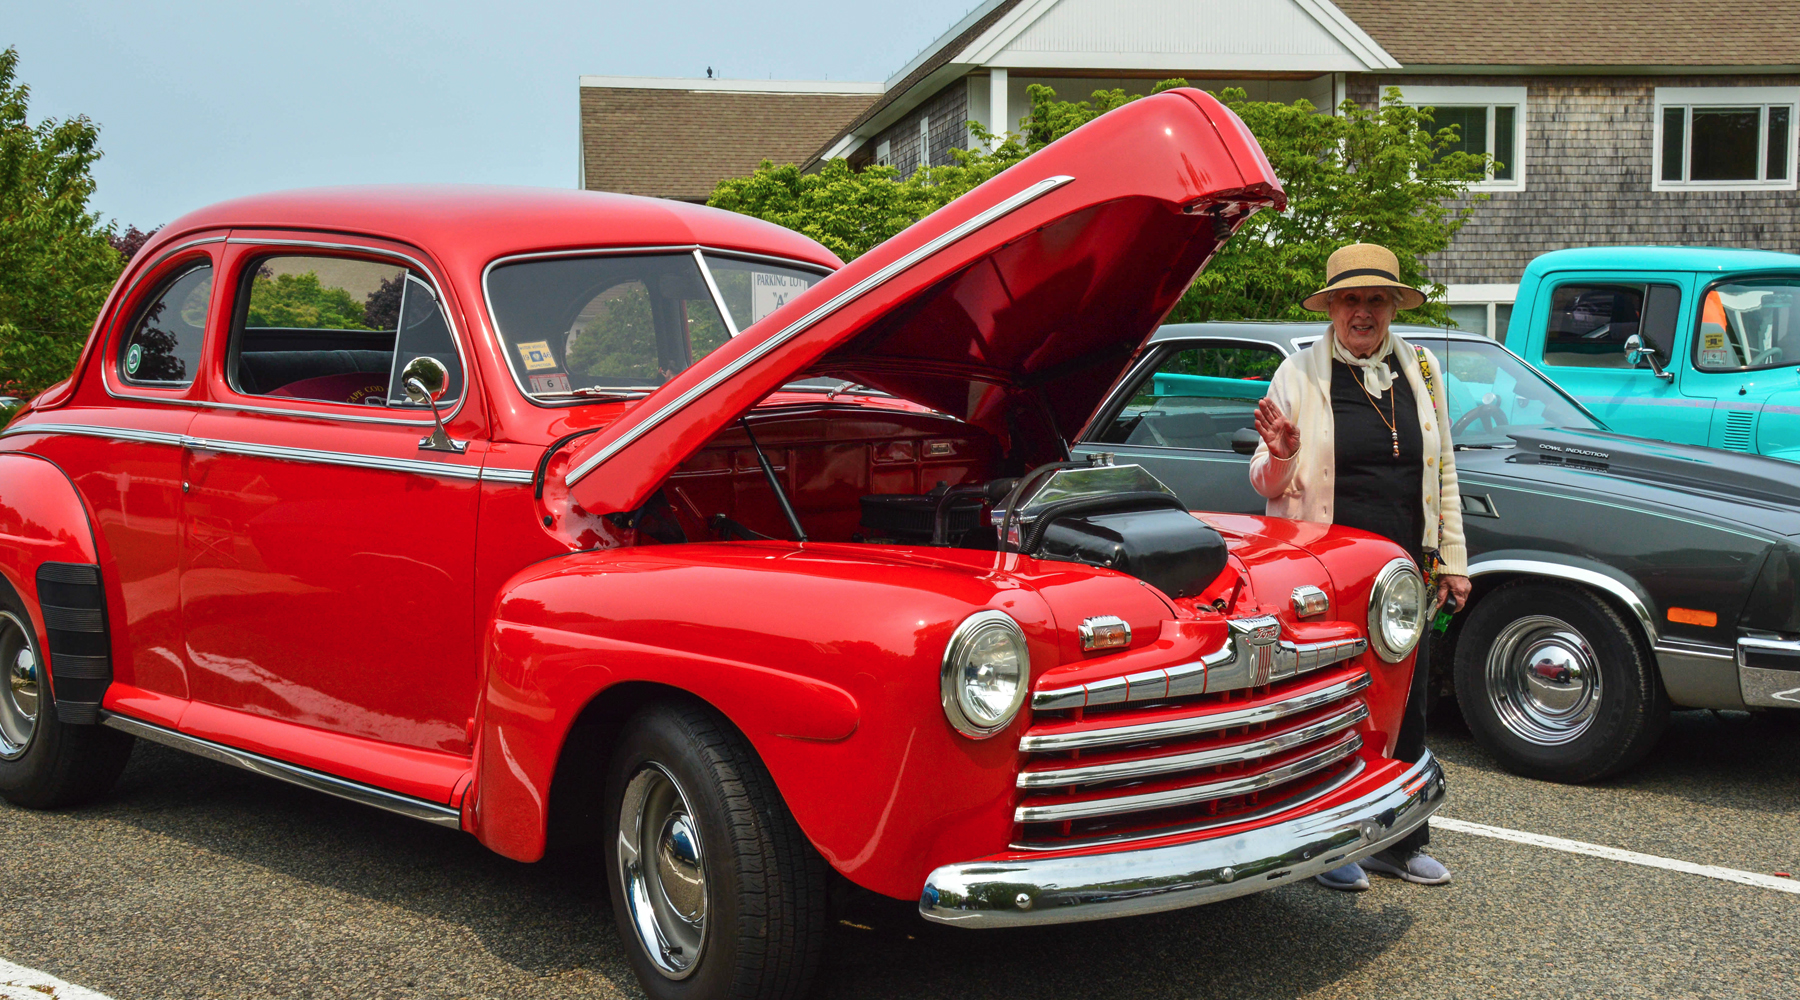 woman standing next to a classic red American car